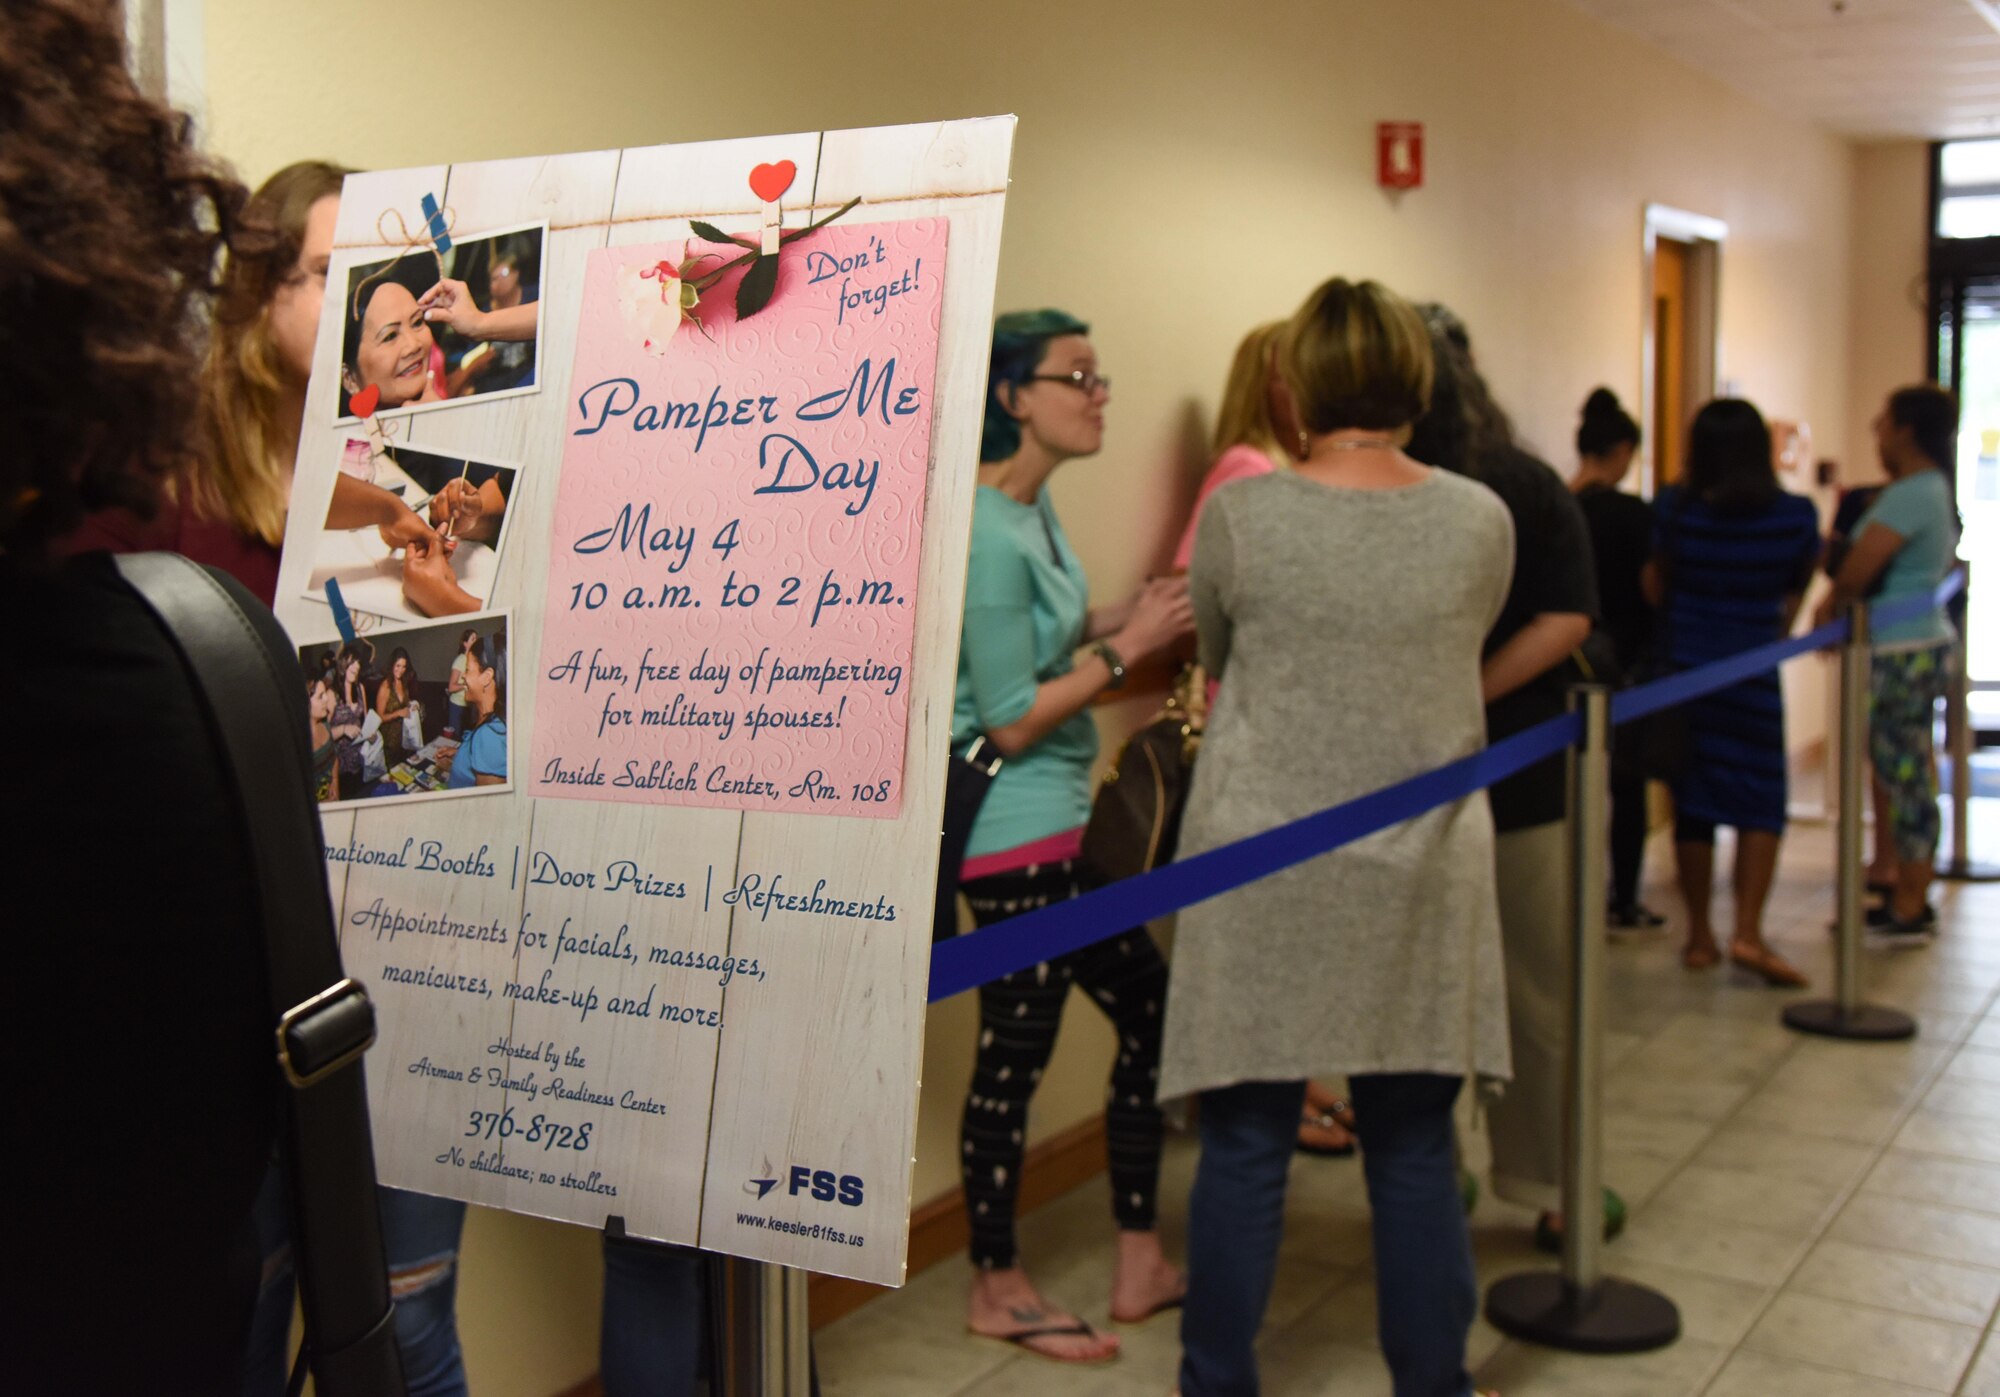 Keesler spouses line the wall during Pamper Me Day at the Sablich Center May 4, 2017, on Keesler Air Force Base, Miss. Keesler’s Airman and Family Readiness Center has hosted the event for the past 13 years, offering spouses free manicures, make-up styling tips and information and business booths. (U.S. Air Force photo by Kemberly Groue)